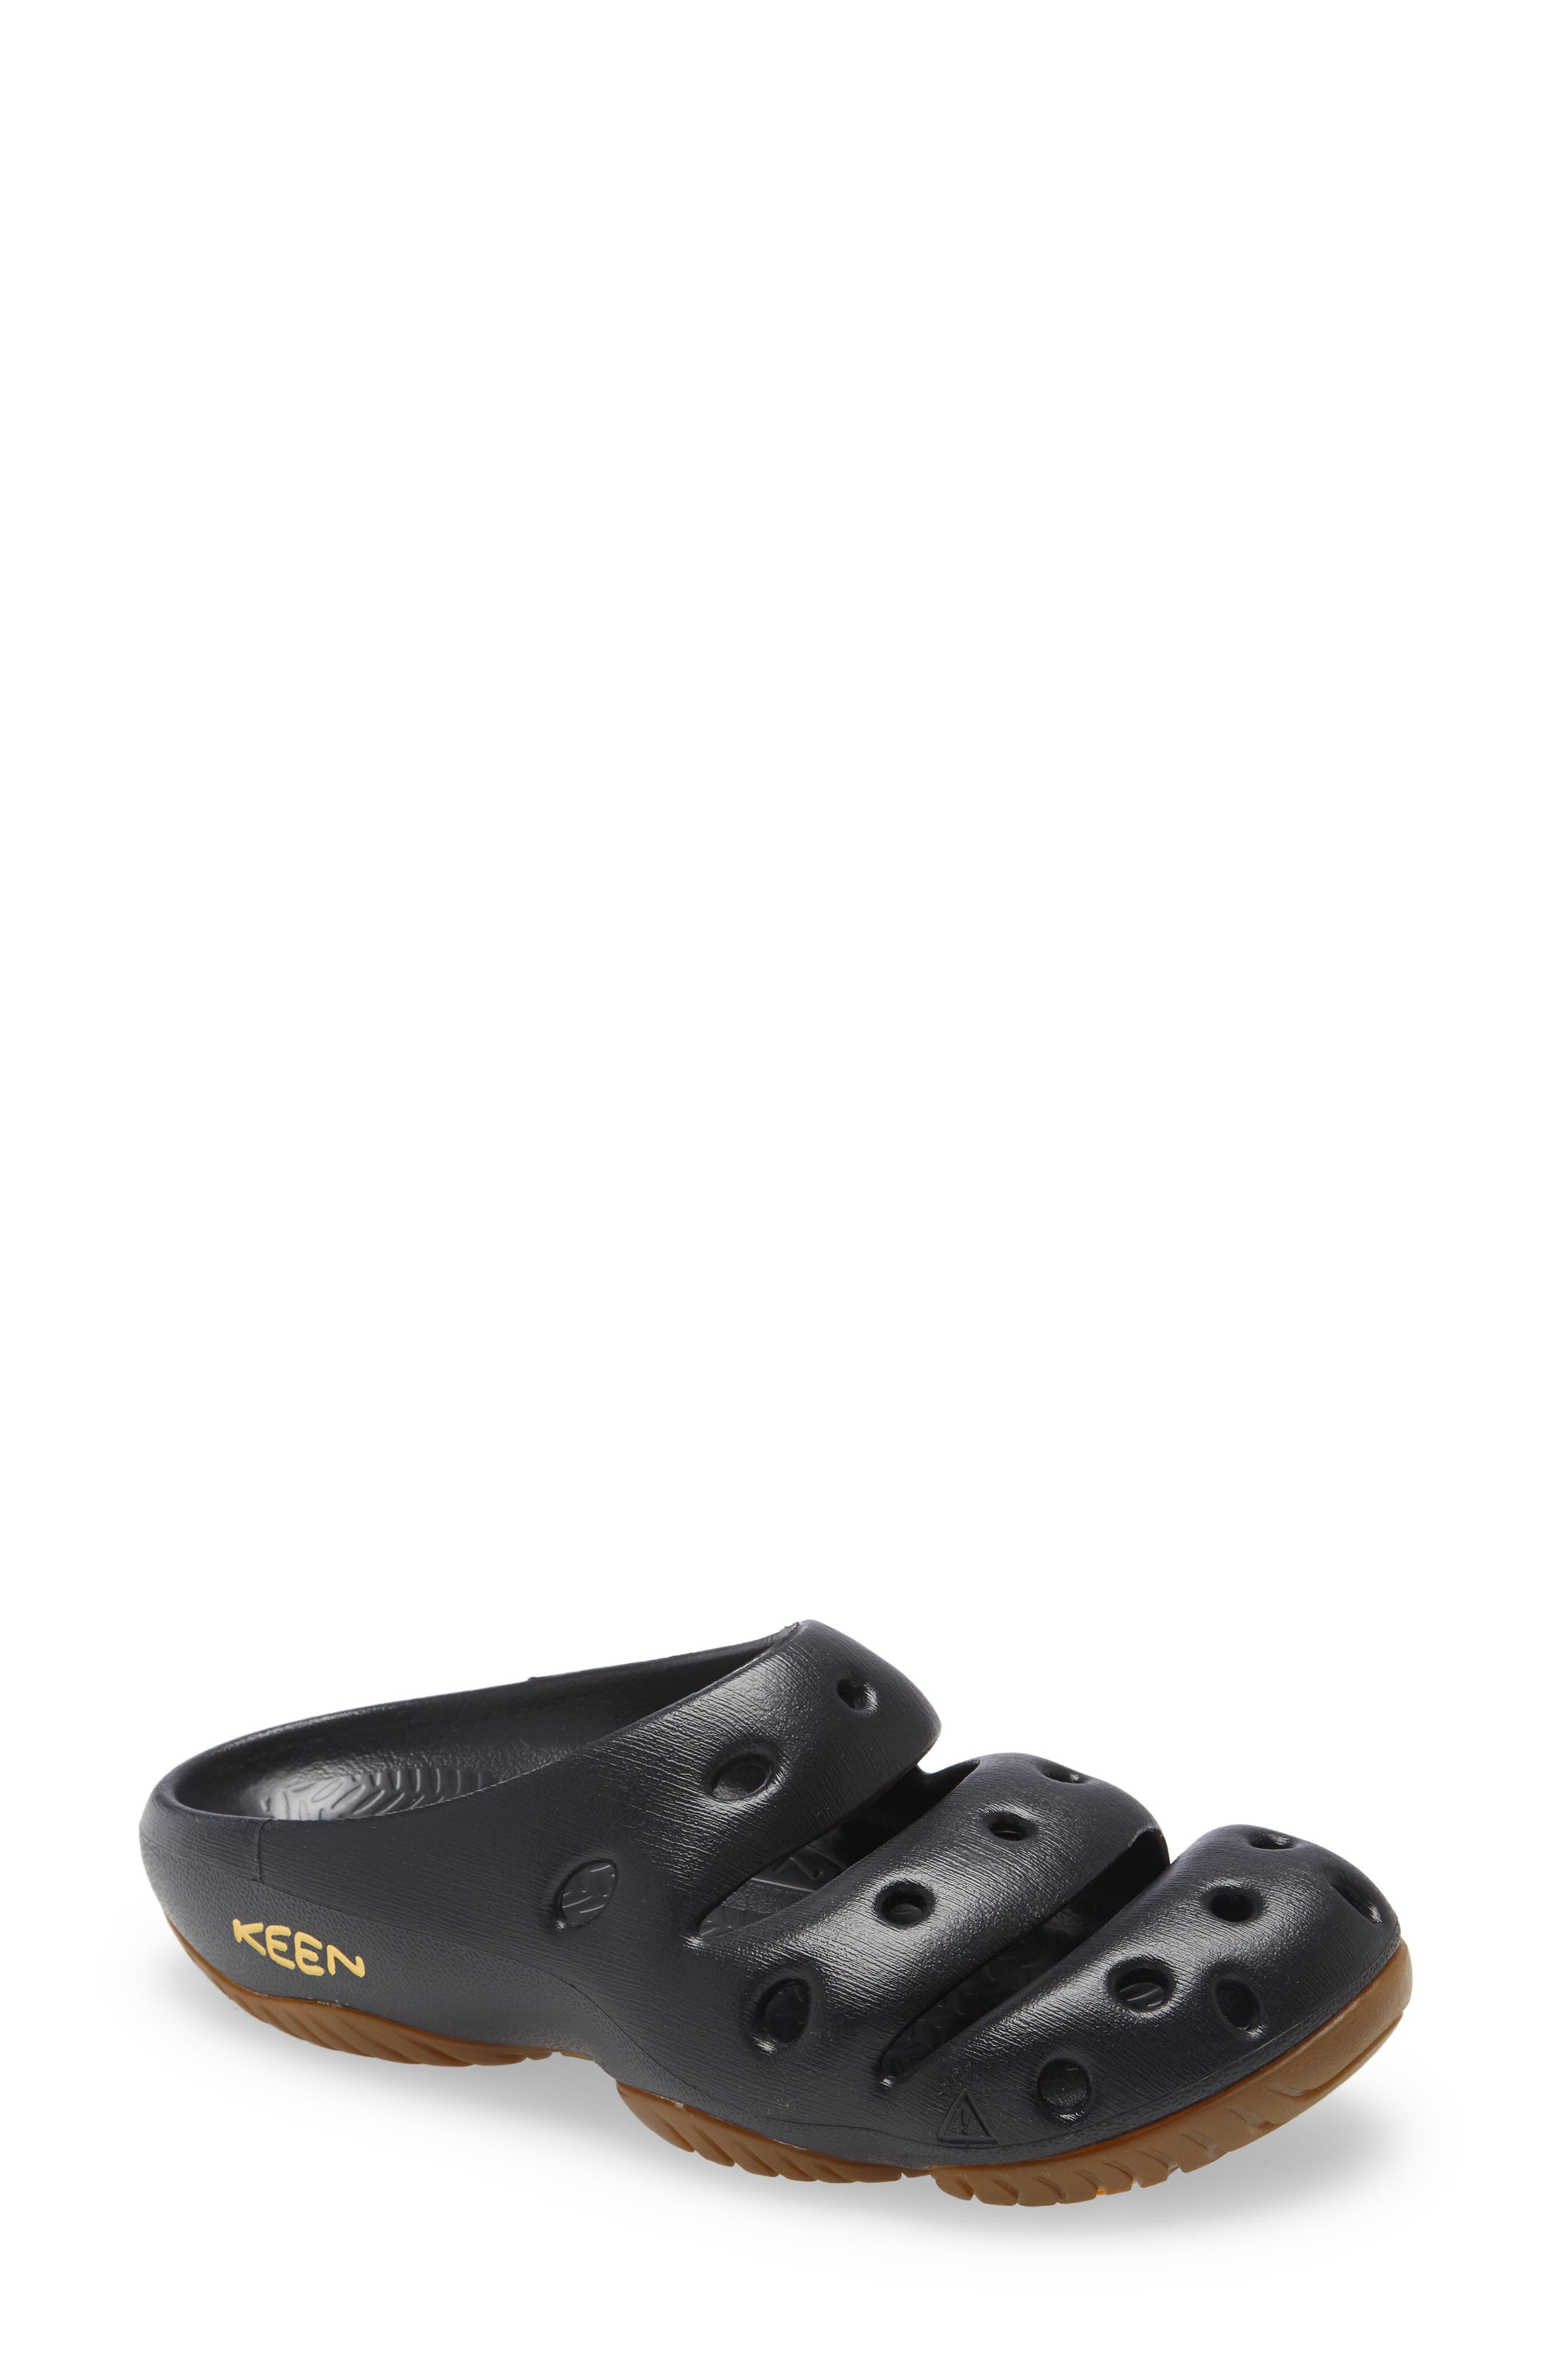 UPC 871209010981 product image for KEEN Yogui Slip-On, Size 12 in Black at Nordstrom | upcitemdb.com